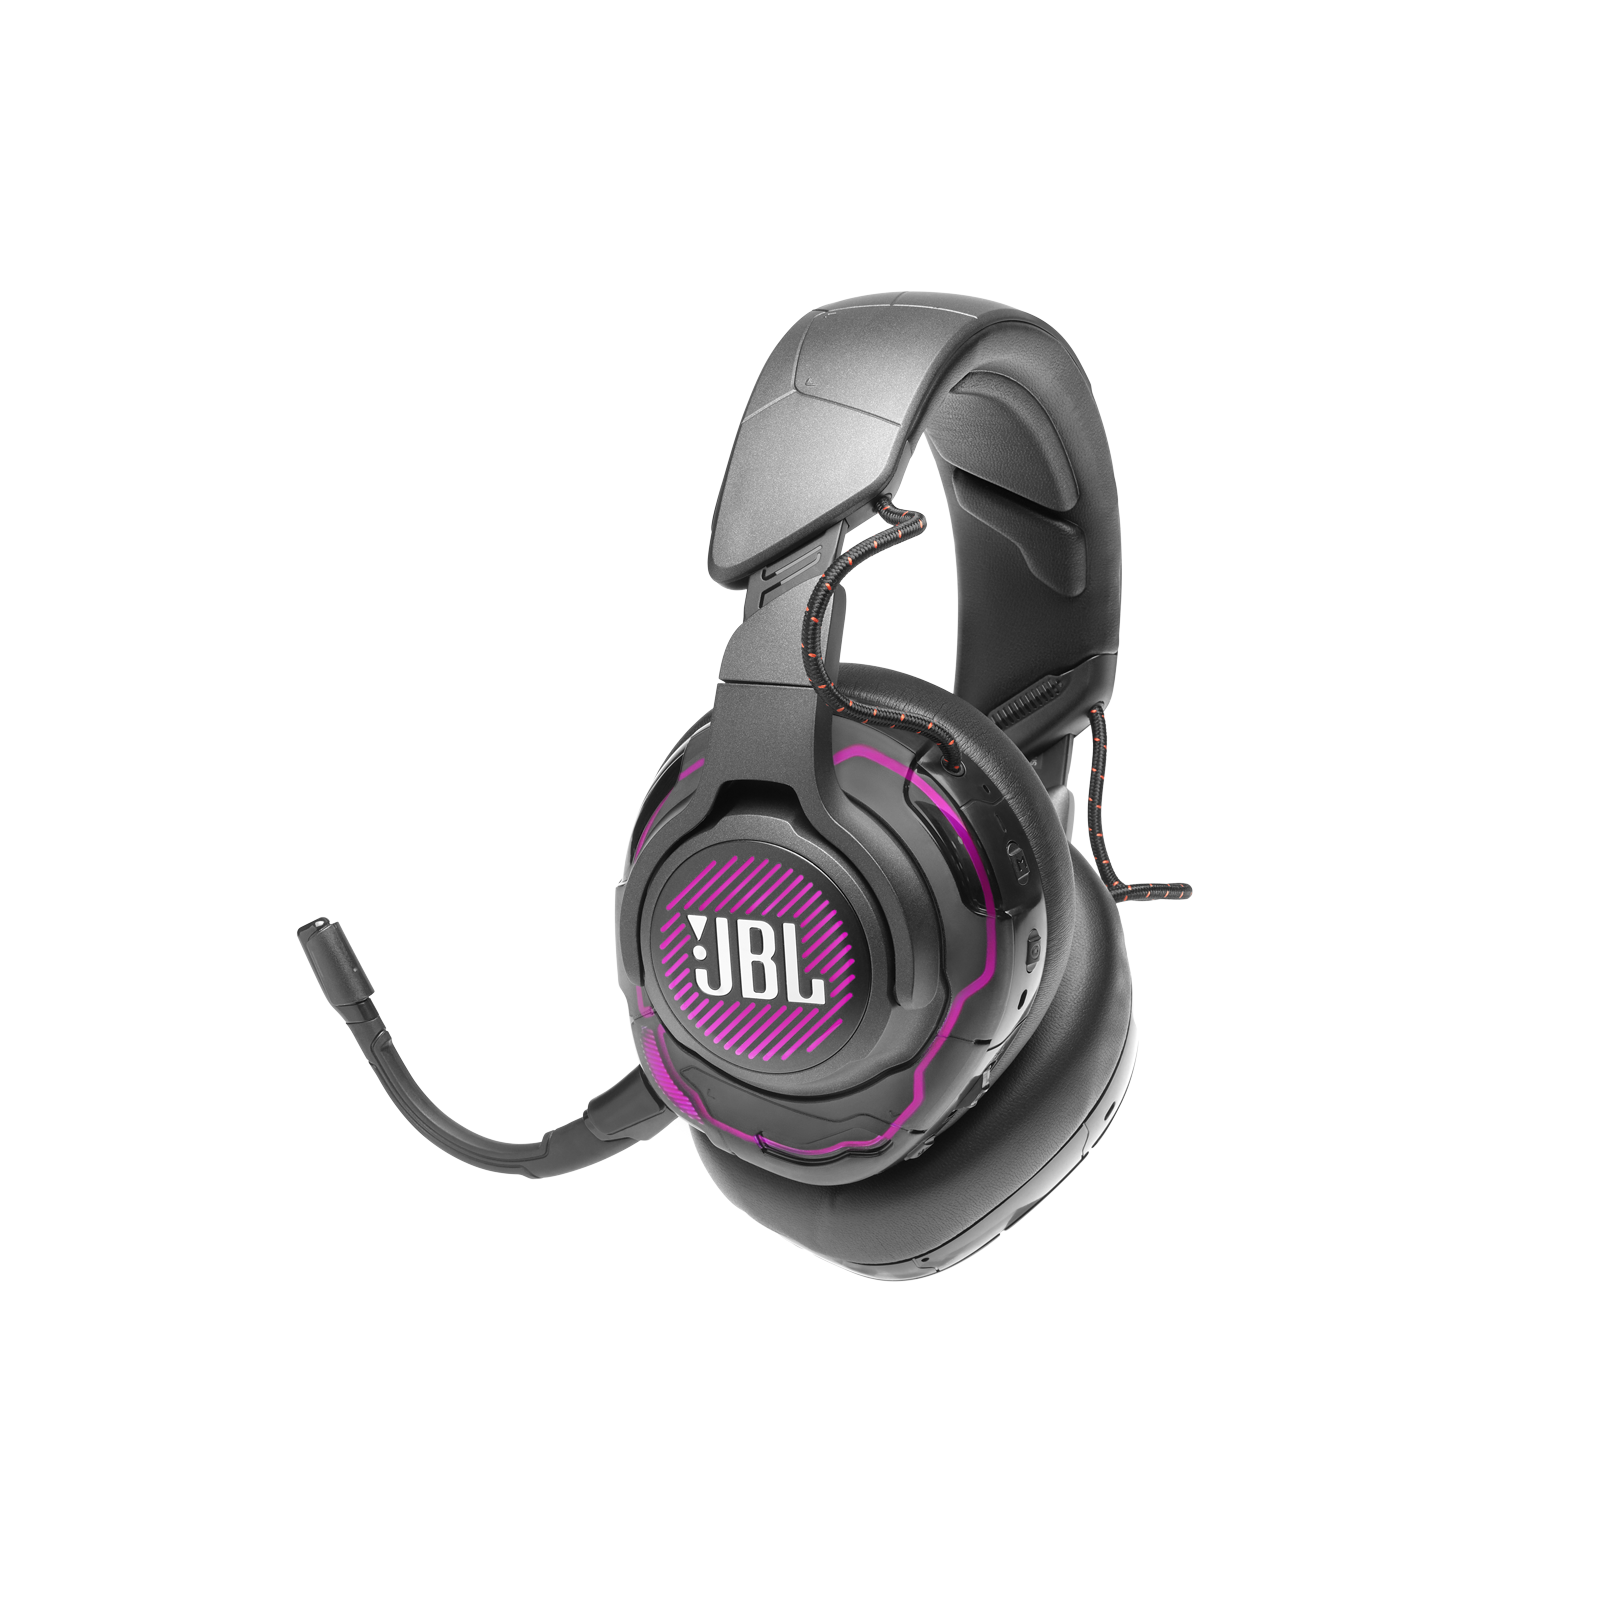 JBL Quantum ONE - Black - USB Wired Over-Ear Professional PC Gaming Headset with Head-Tracking Enhanced QuantumSPHERE 360 - Detailshot 3